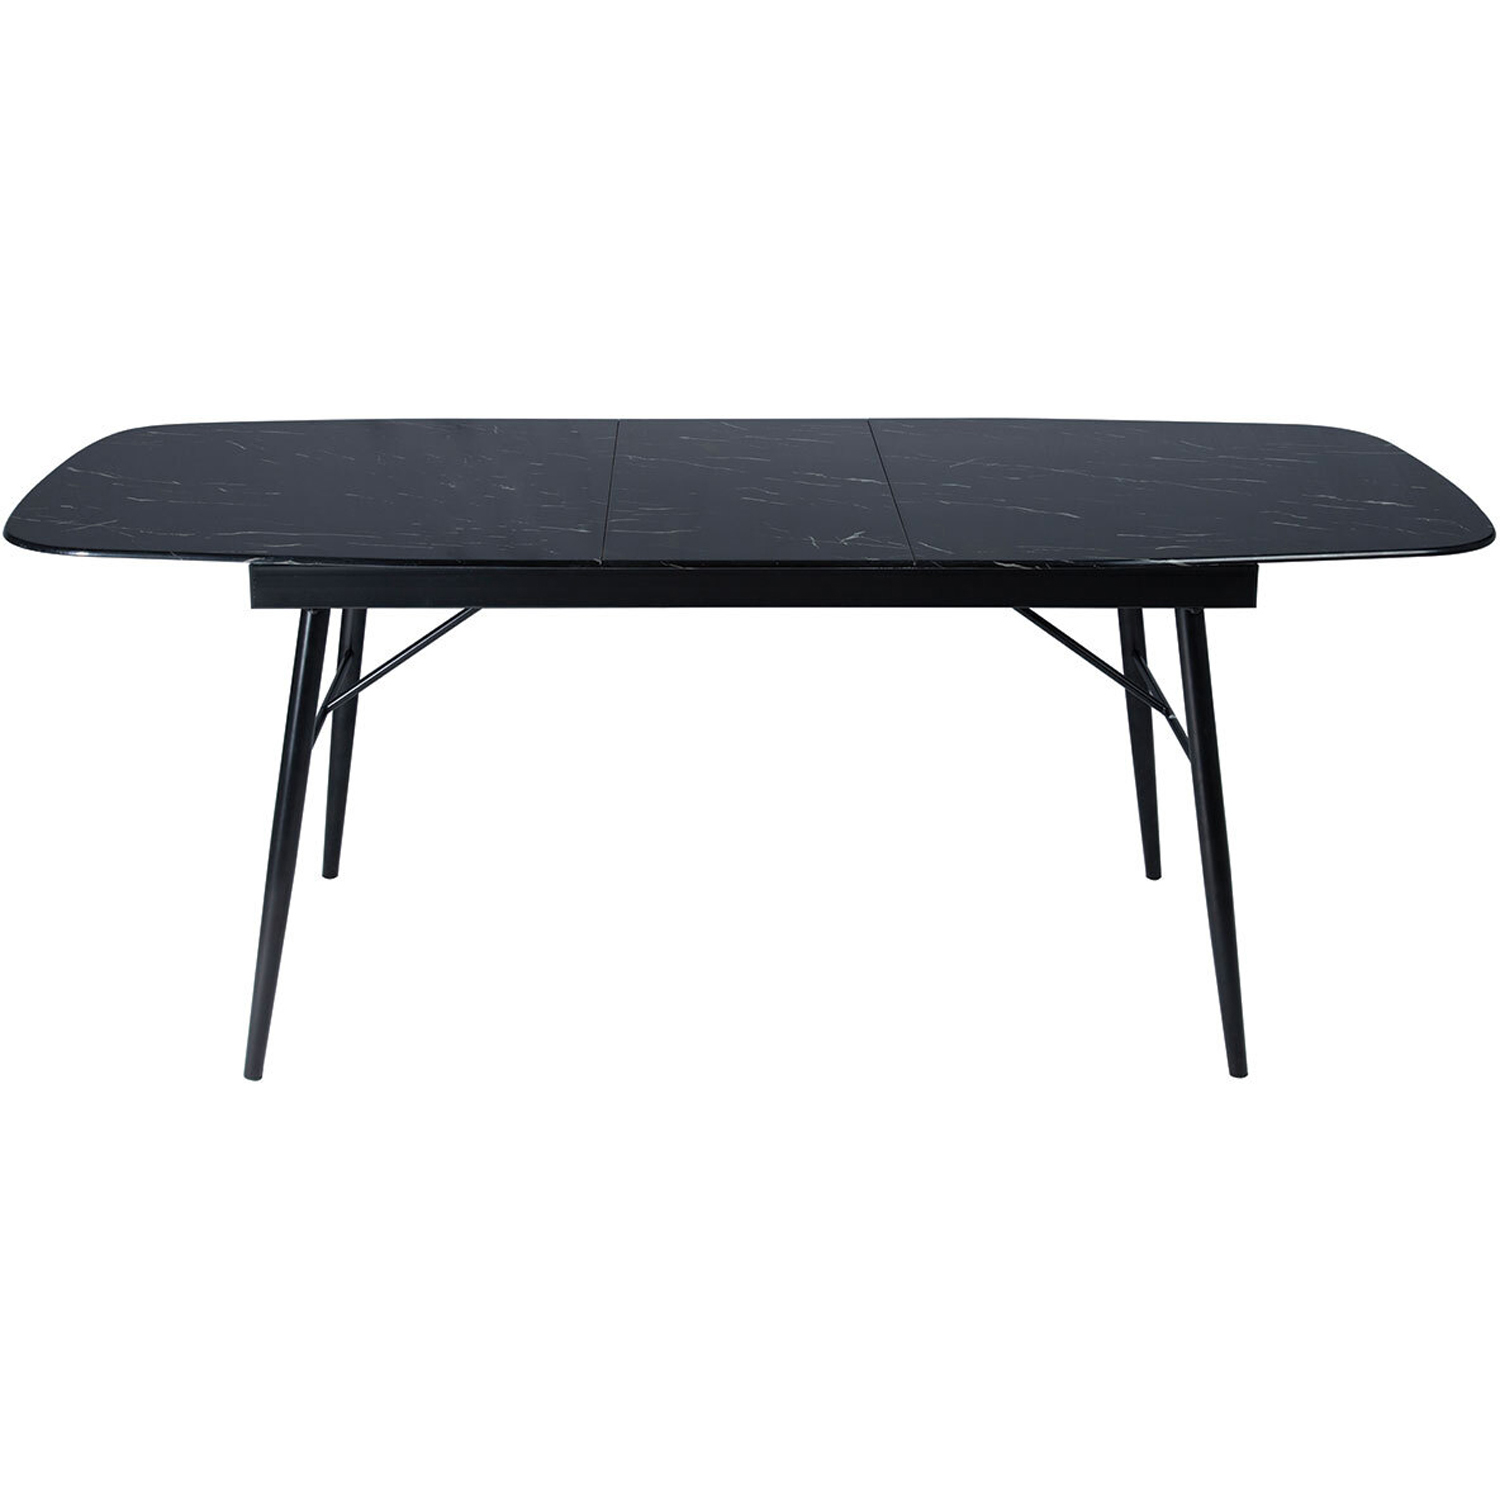 Sorrento Marble 6 Seater 160 to 200cm Extending Dining Table Black Image 3